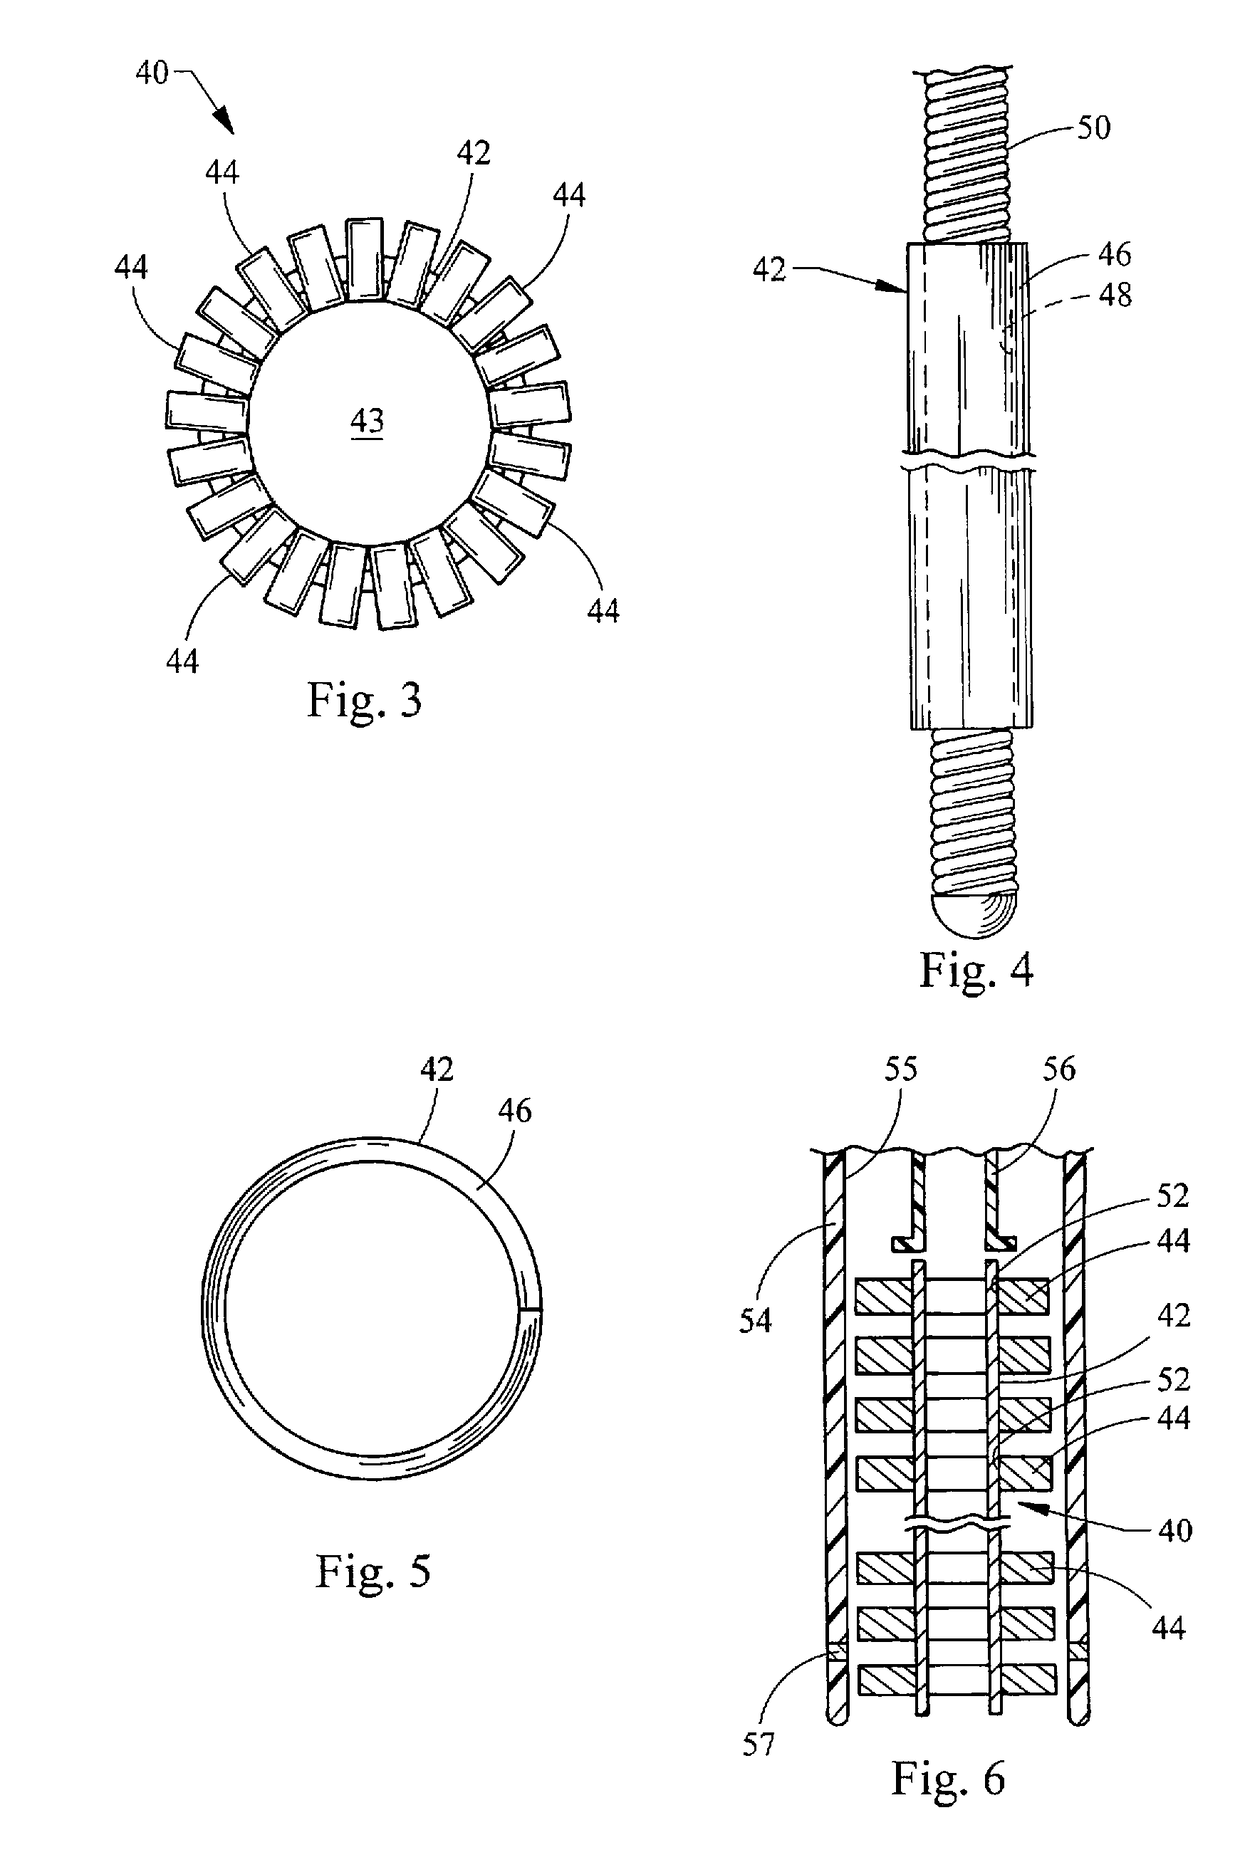 Magnetic anastomosis device having improved delivery